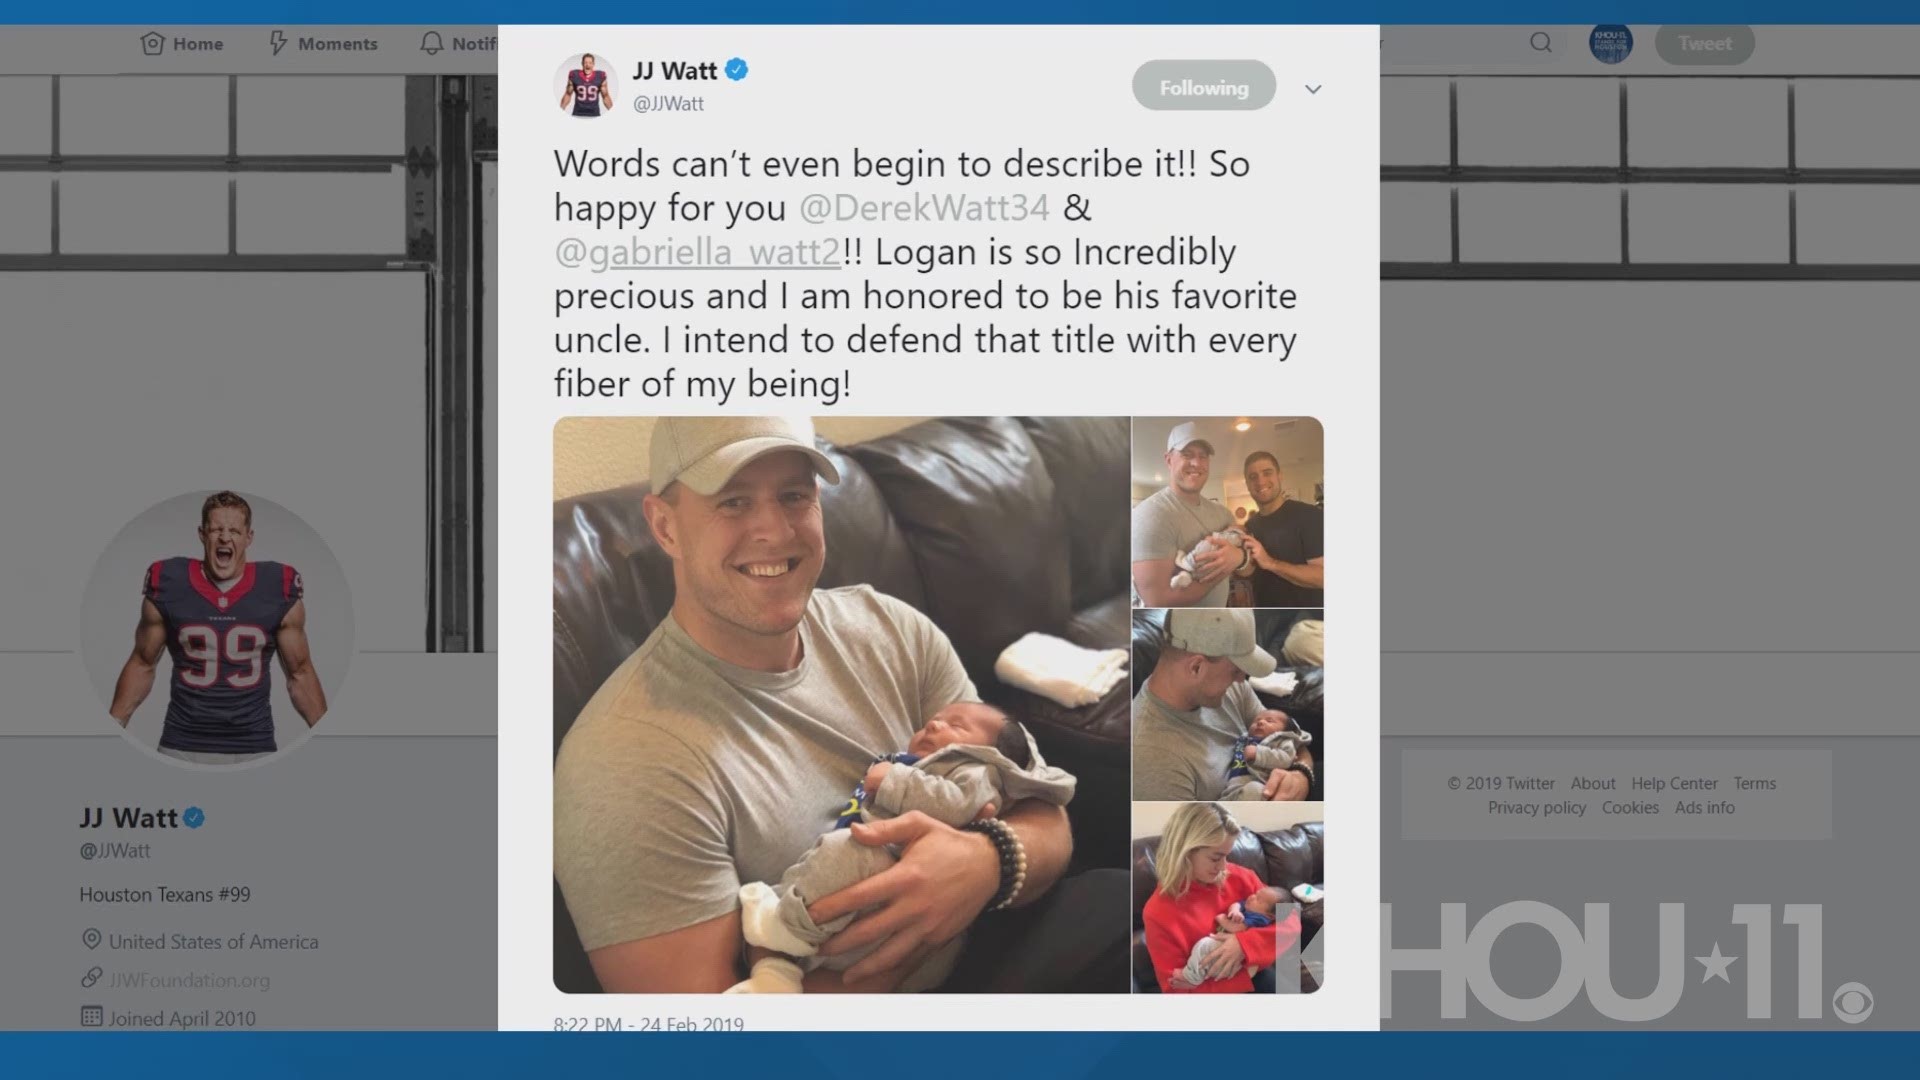 Houston Texans star J.J. Watt is now a proud uncle, and the photos on Twitter are too precious.